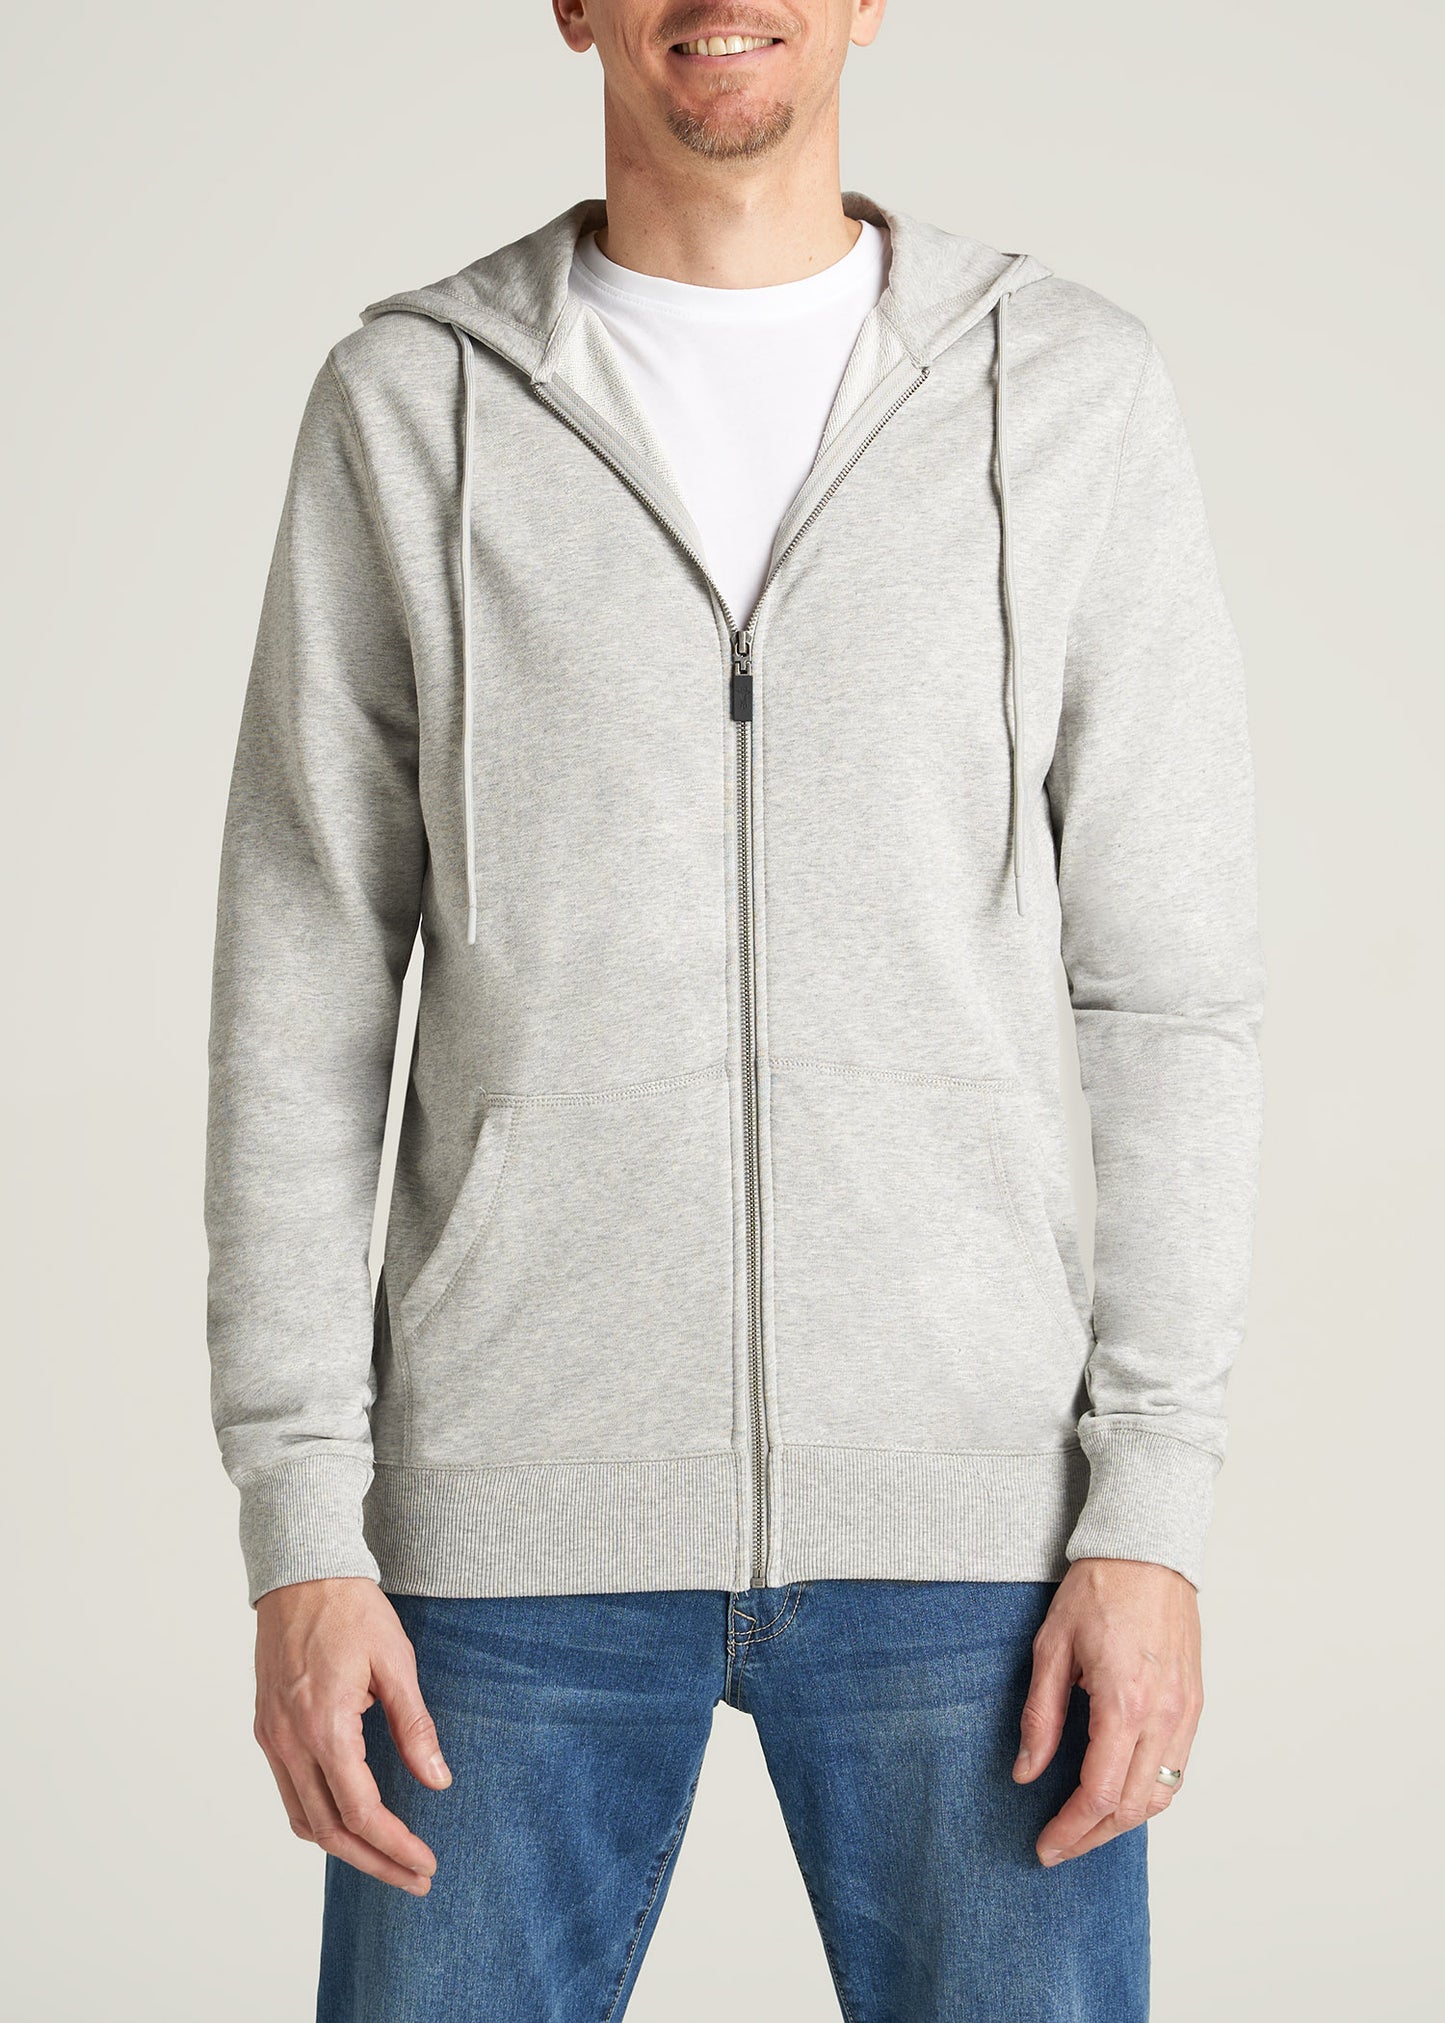 A tall man wearing a full-zip French terry hoodie in a light grey mix.